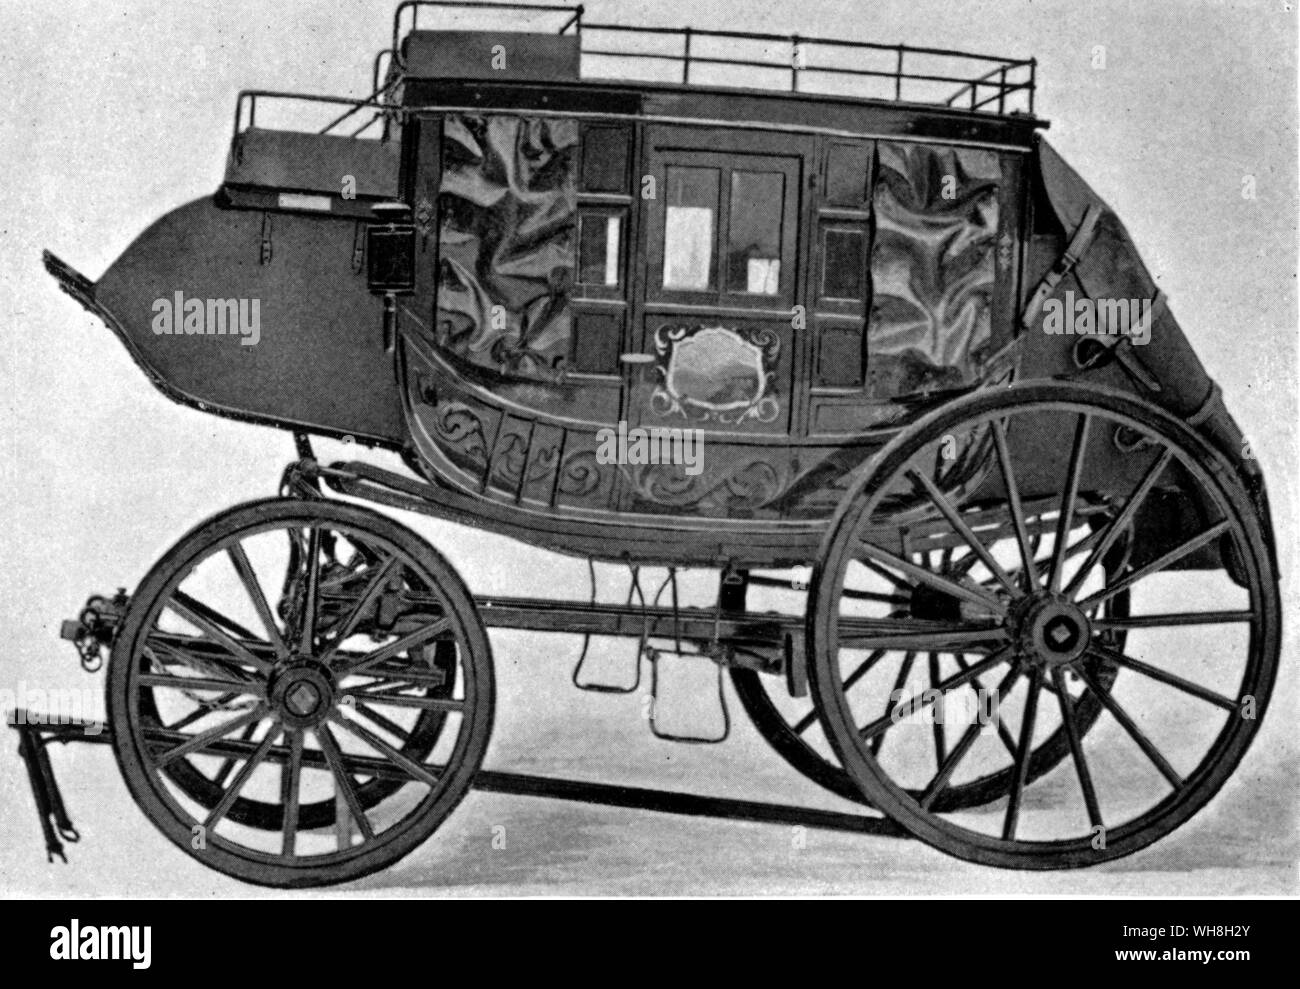 American Stagecoach. Heavy Concord Coach made by the Abbot Downing Company of Concord, New Hampshire. From Encyclopedia of the Horse page 48. Stock Photo